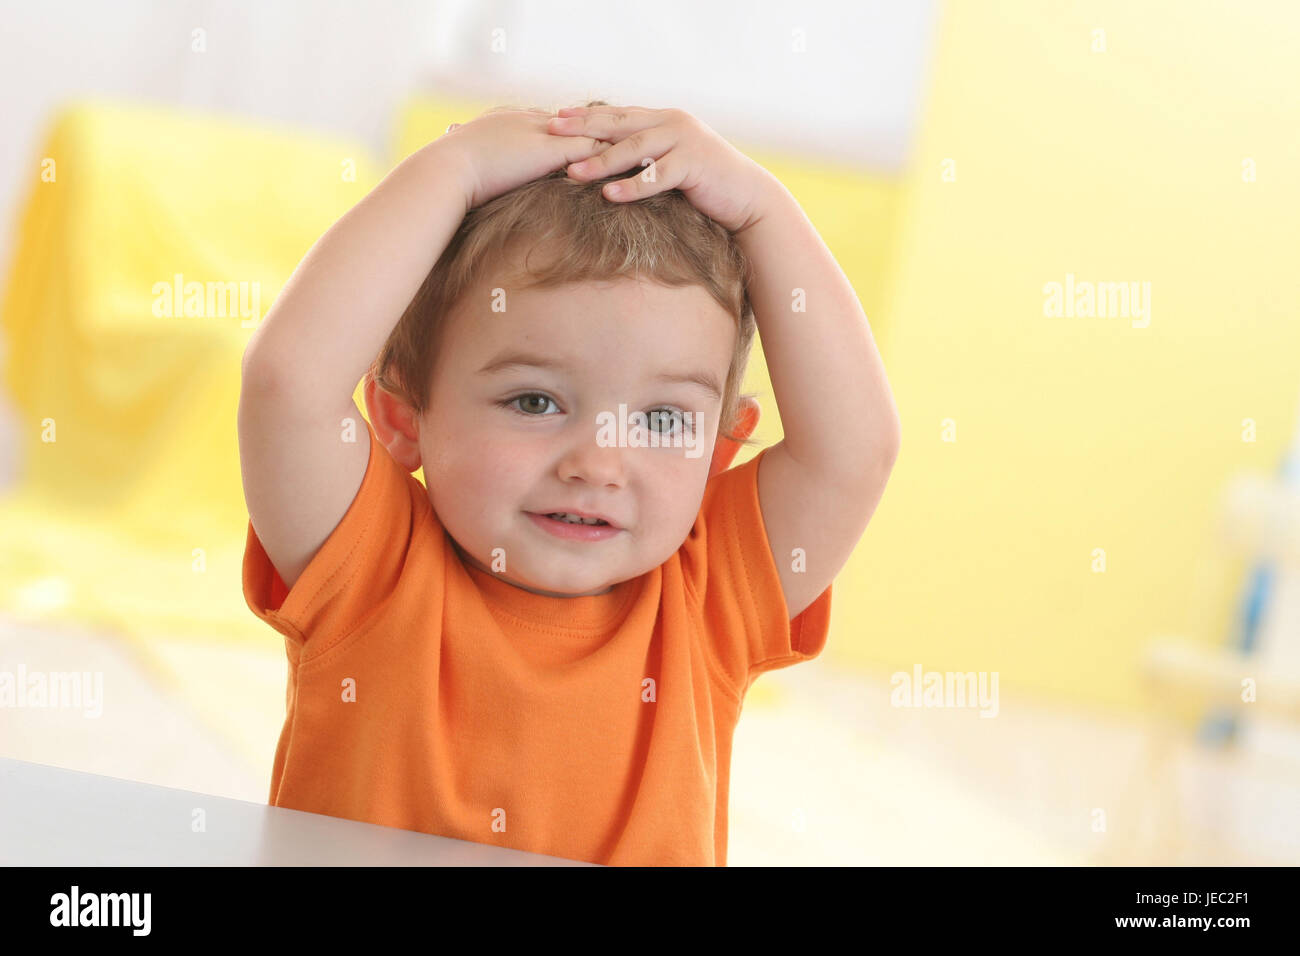 Infant, 2 years, play, gesture, hands on the head, portrait, Stock Photo